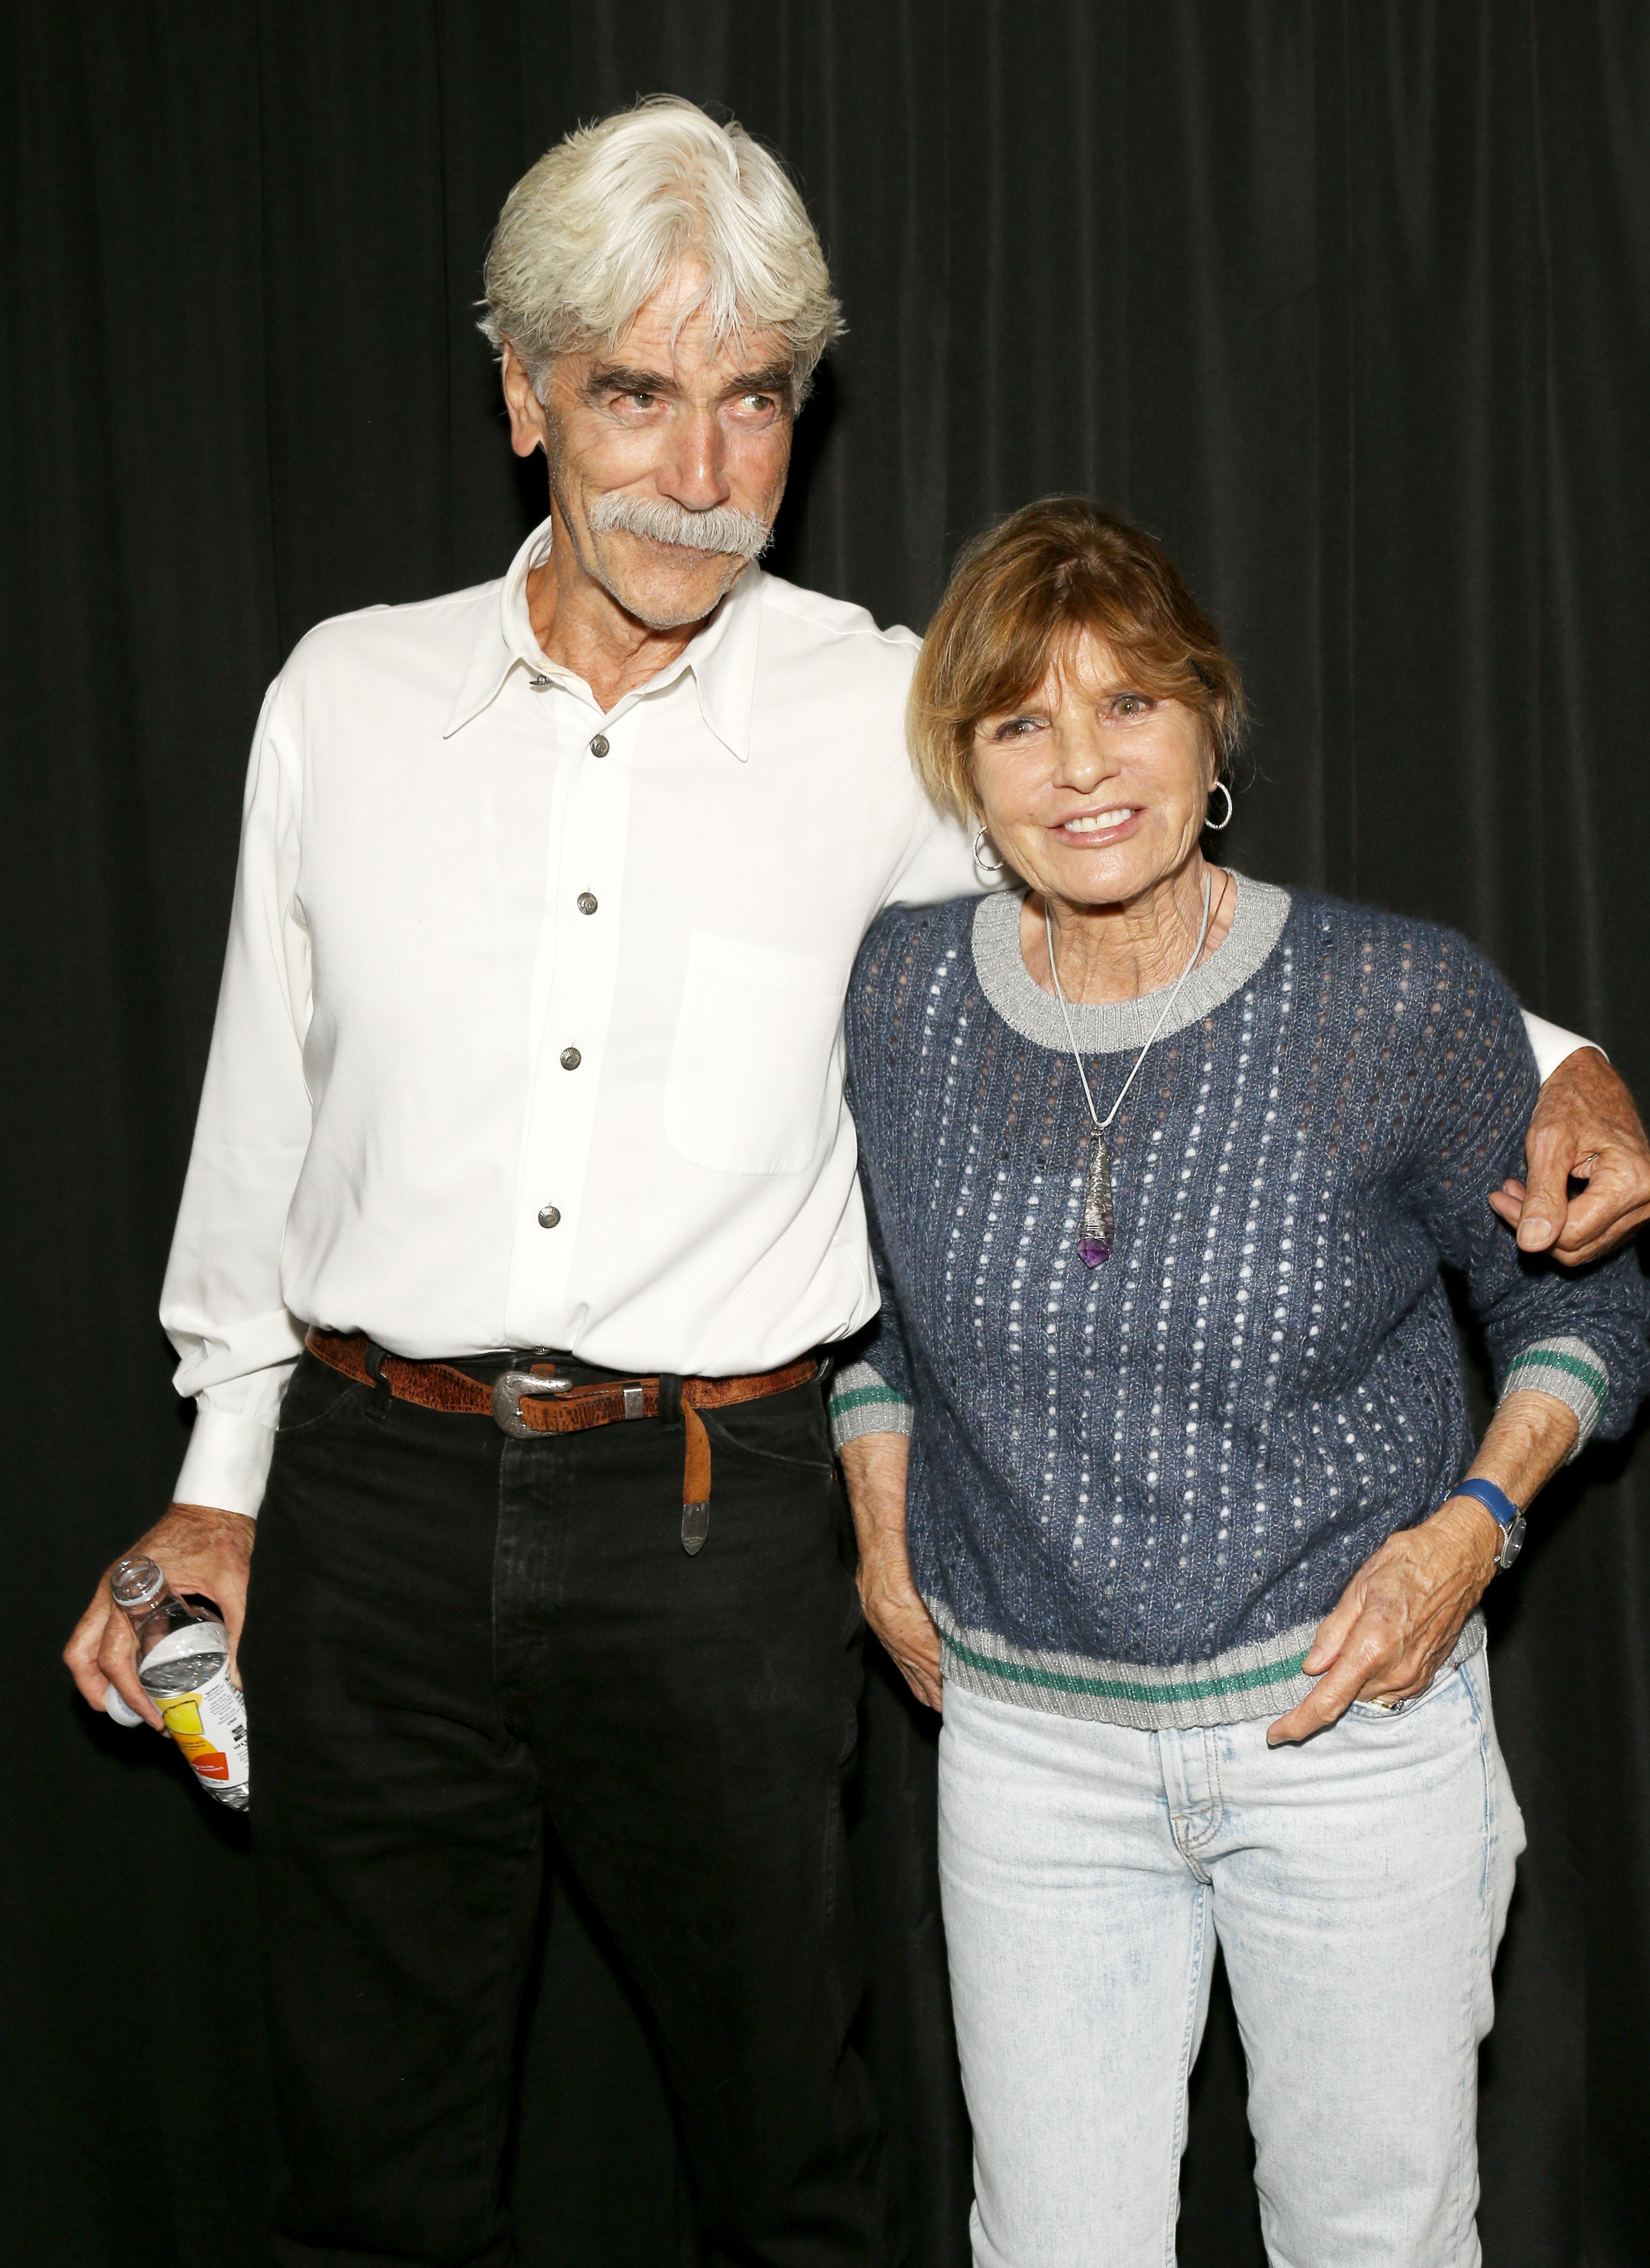 Sam Elliott and Katharine Ross attend the Stacy Poitras' Art Gallery Exhibition for documentary premiere of "The Chainsaw Artist" held on September 14, 2019 in Hollywood, California. | Source: Getty Images